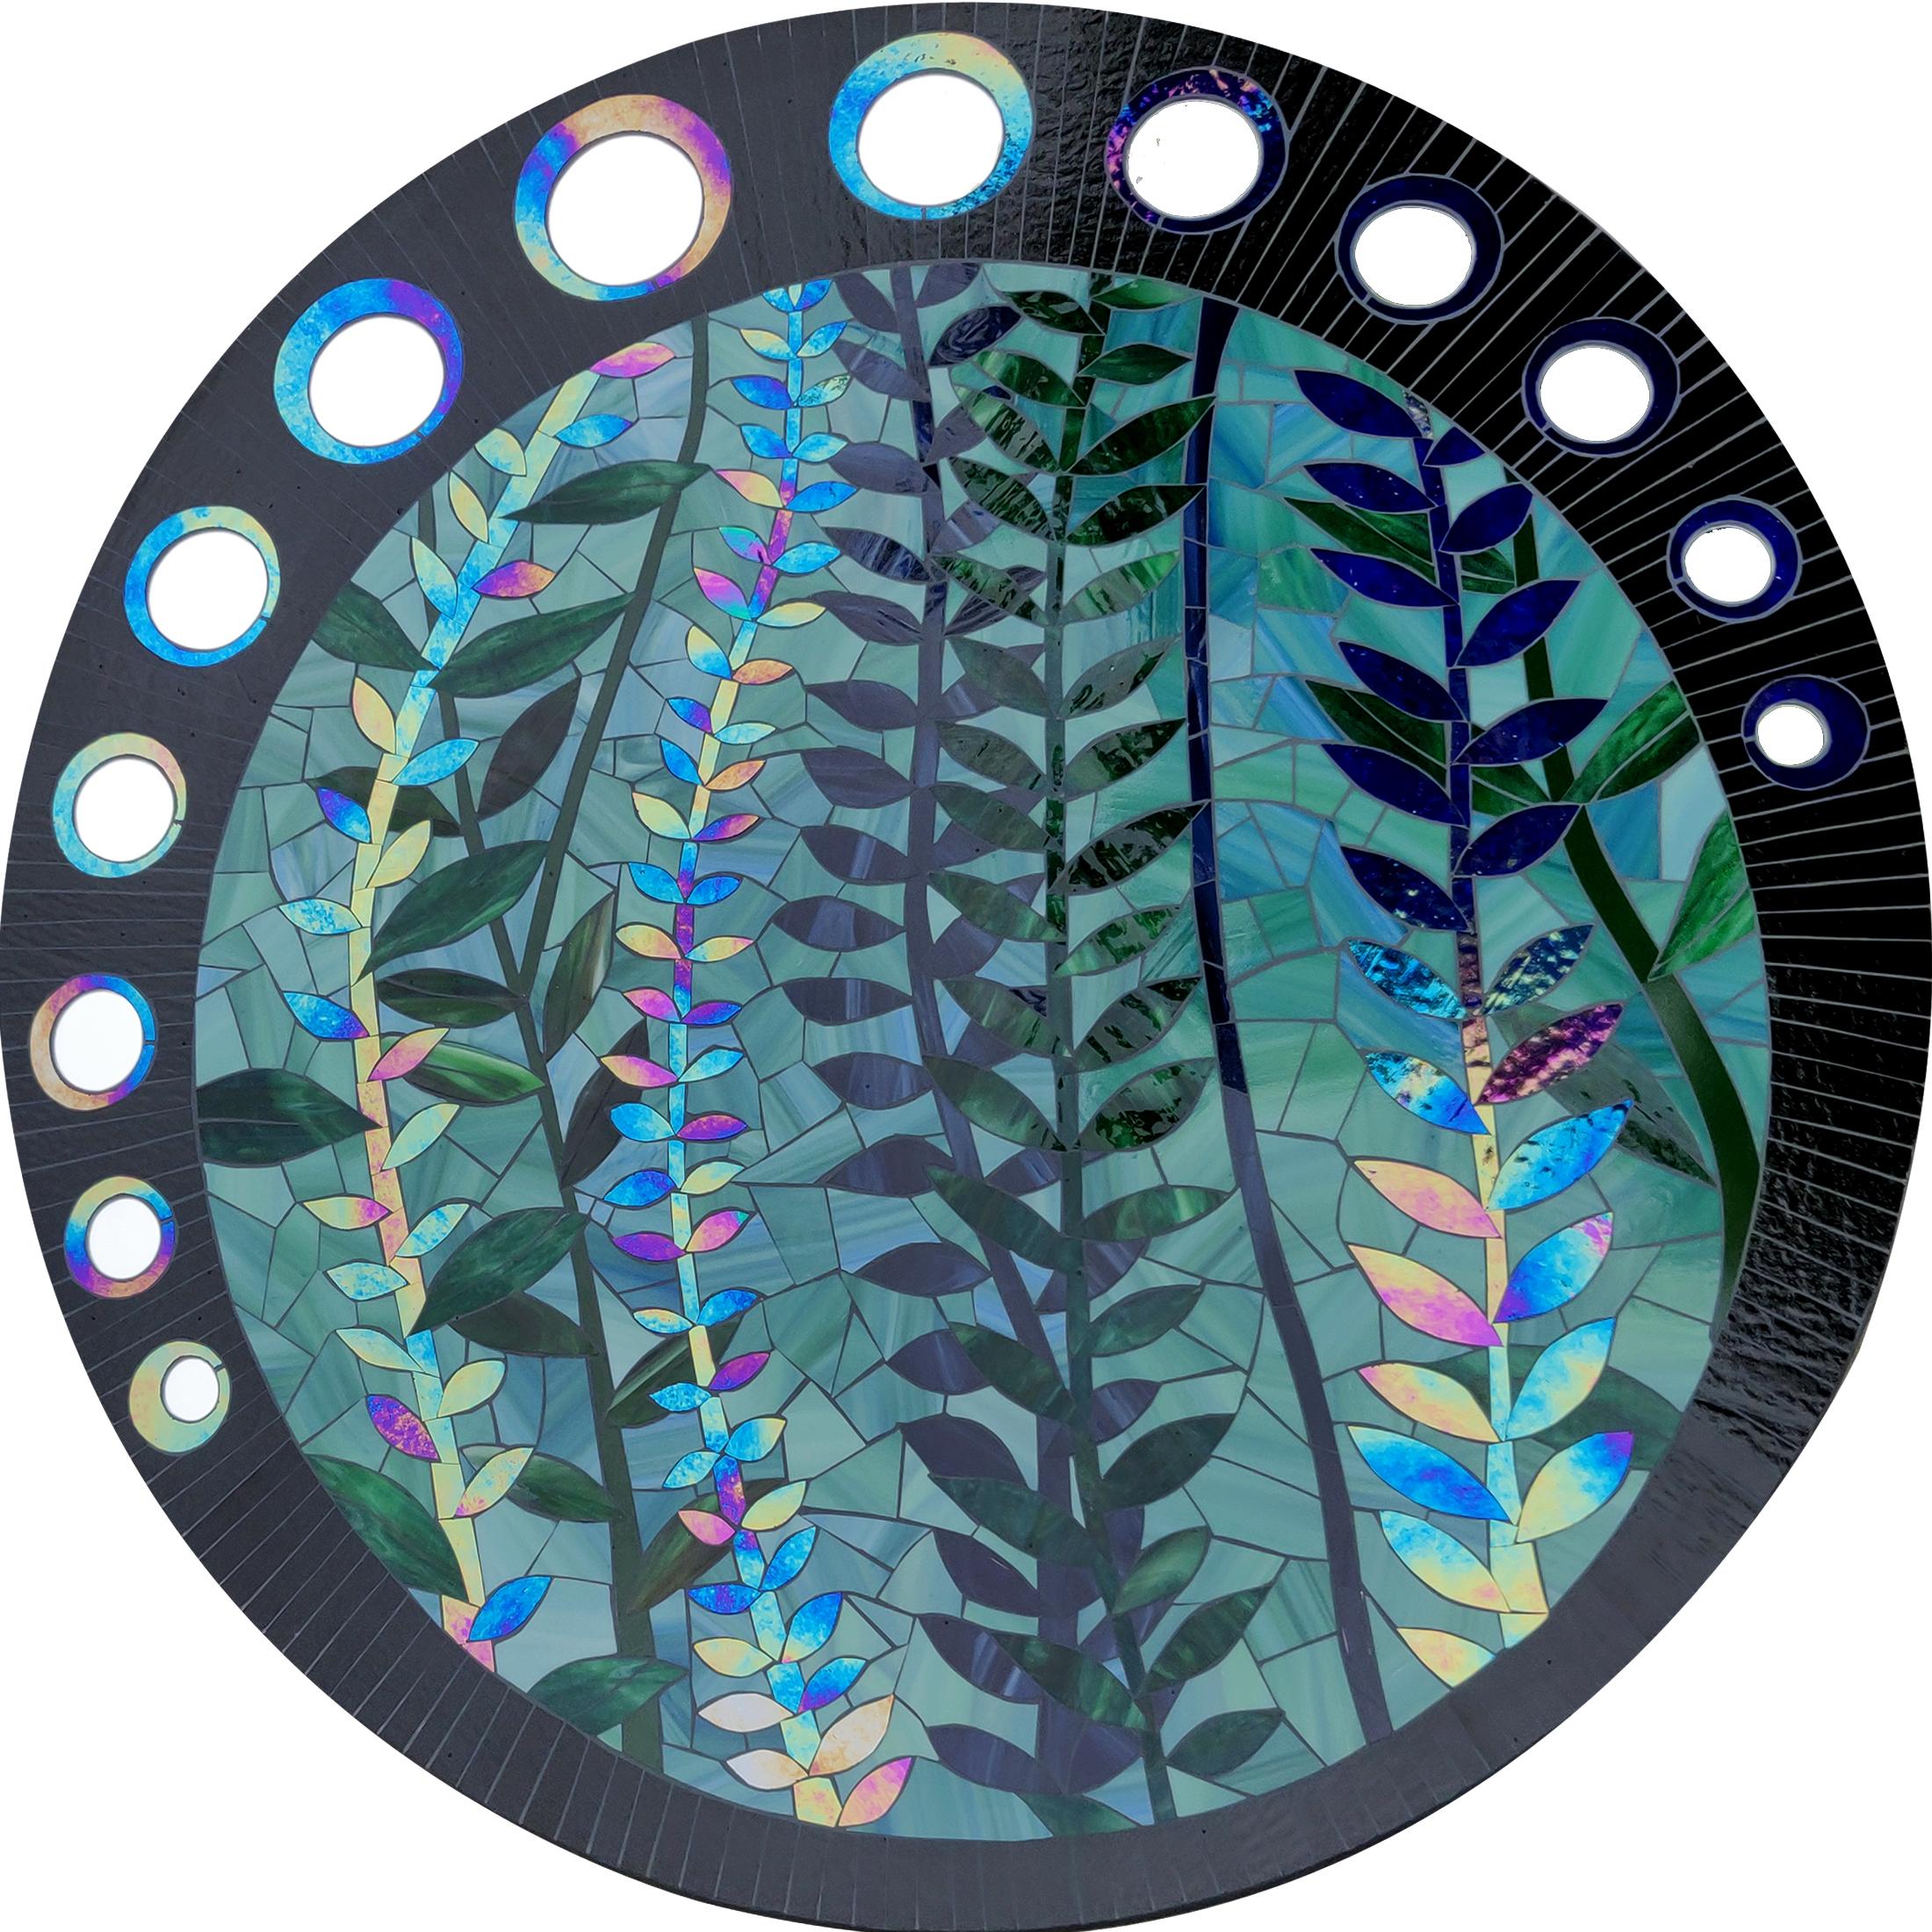 Rain Forest wall sculpture by Myriam Hubert.
Dimensions: W 96 x H 96 cm.
Materials: 'Glass marquetry' with mirror inlays.

Intended for residential and hotel interiors, Myriam Hubert's wall compositions evoke stained glass with a new approach.